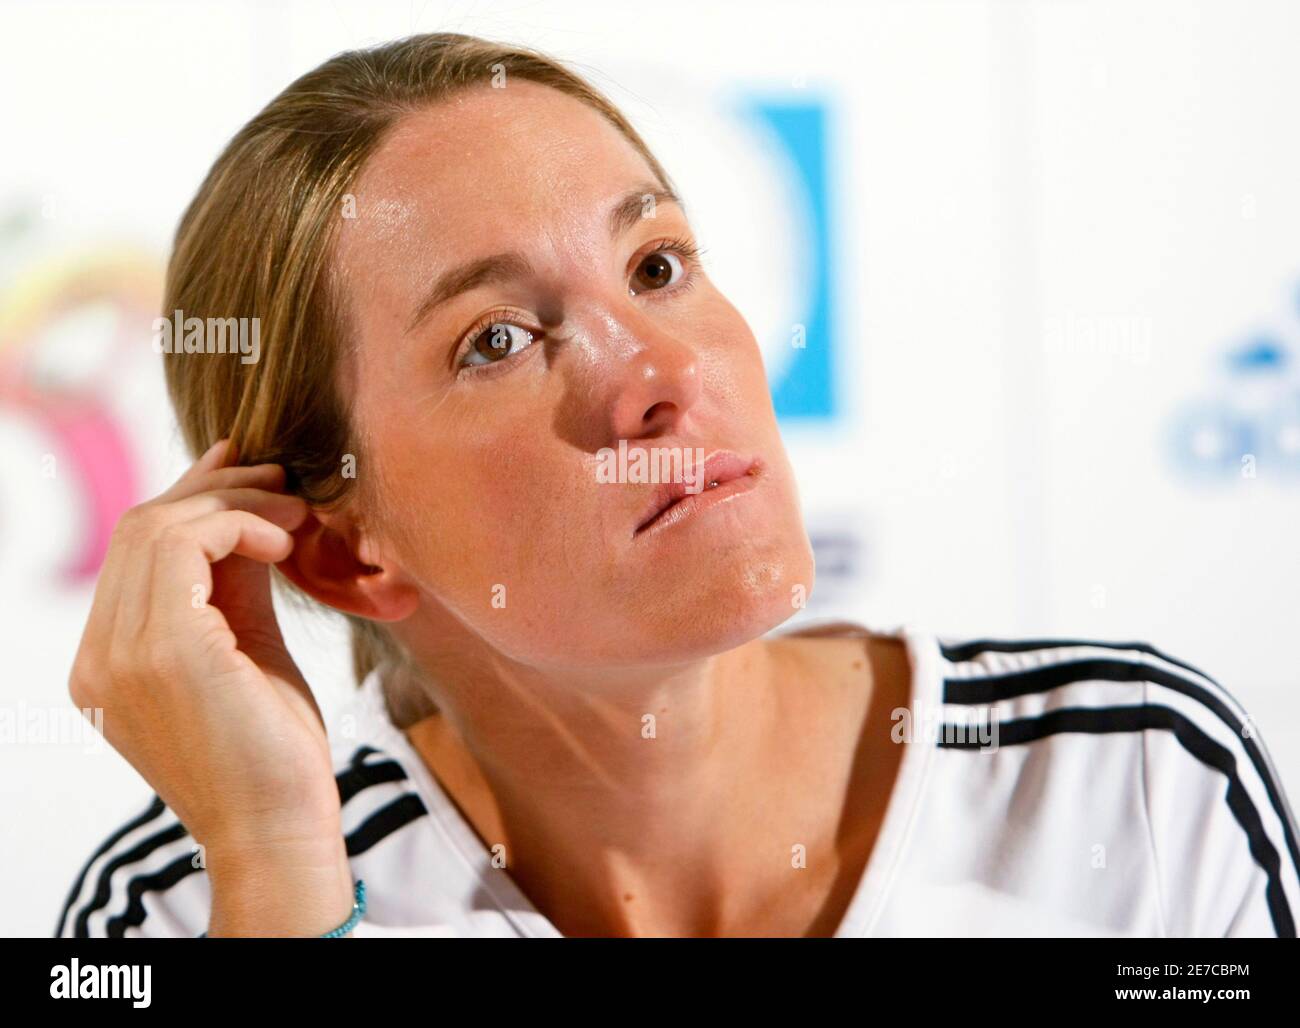 World number one Justine Henin holds a news conference in Limelette, May  14, 2008. Henin announced her retirement from professional tennis.  REUTERS/Francois Lenoir (BELGIUM Stock Photo - Alamy